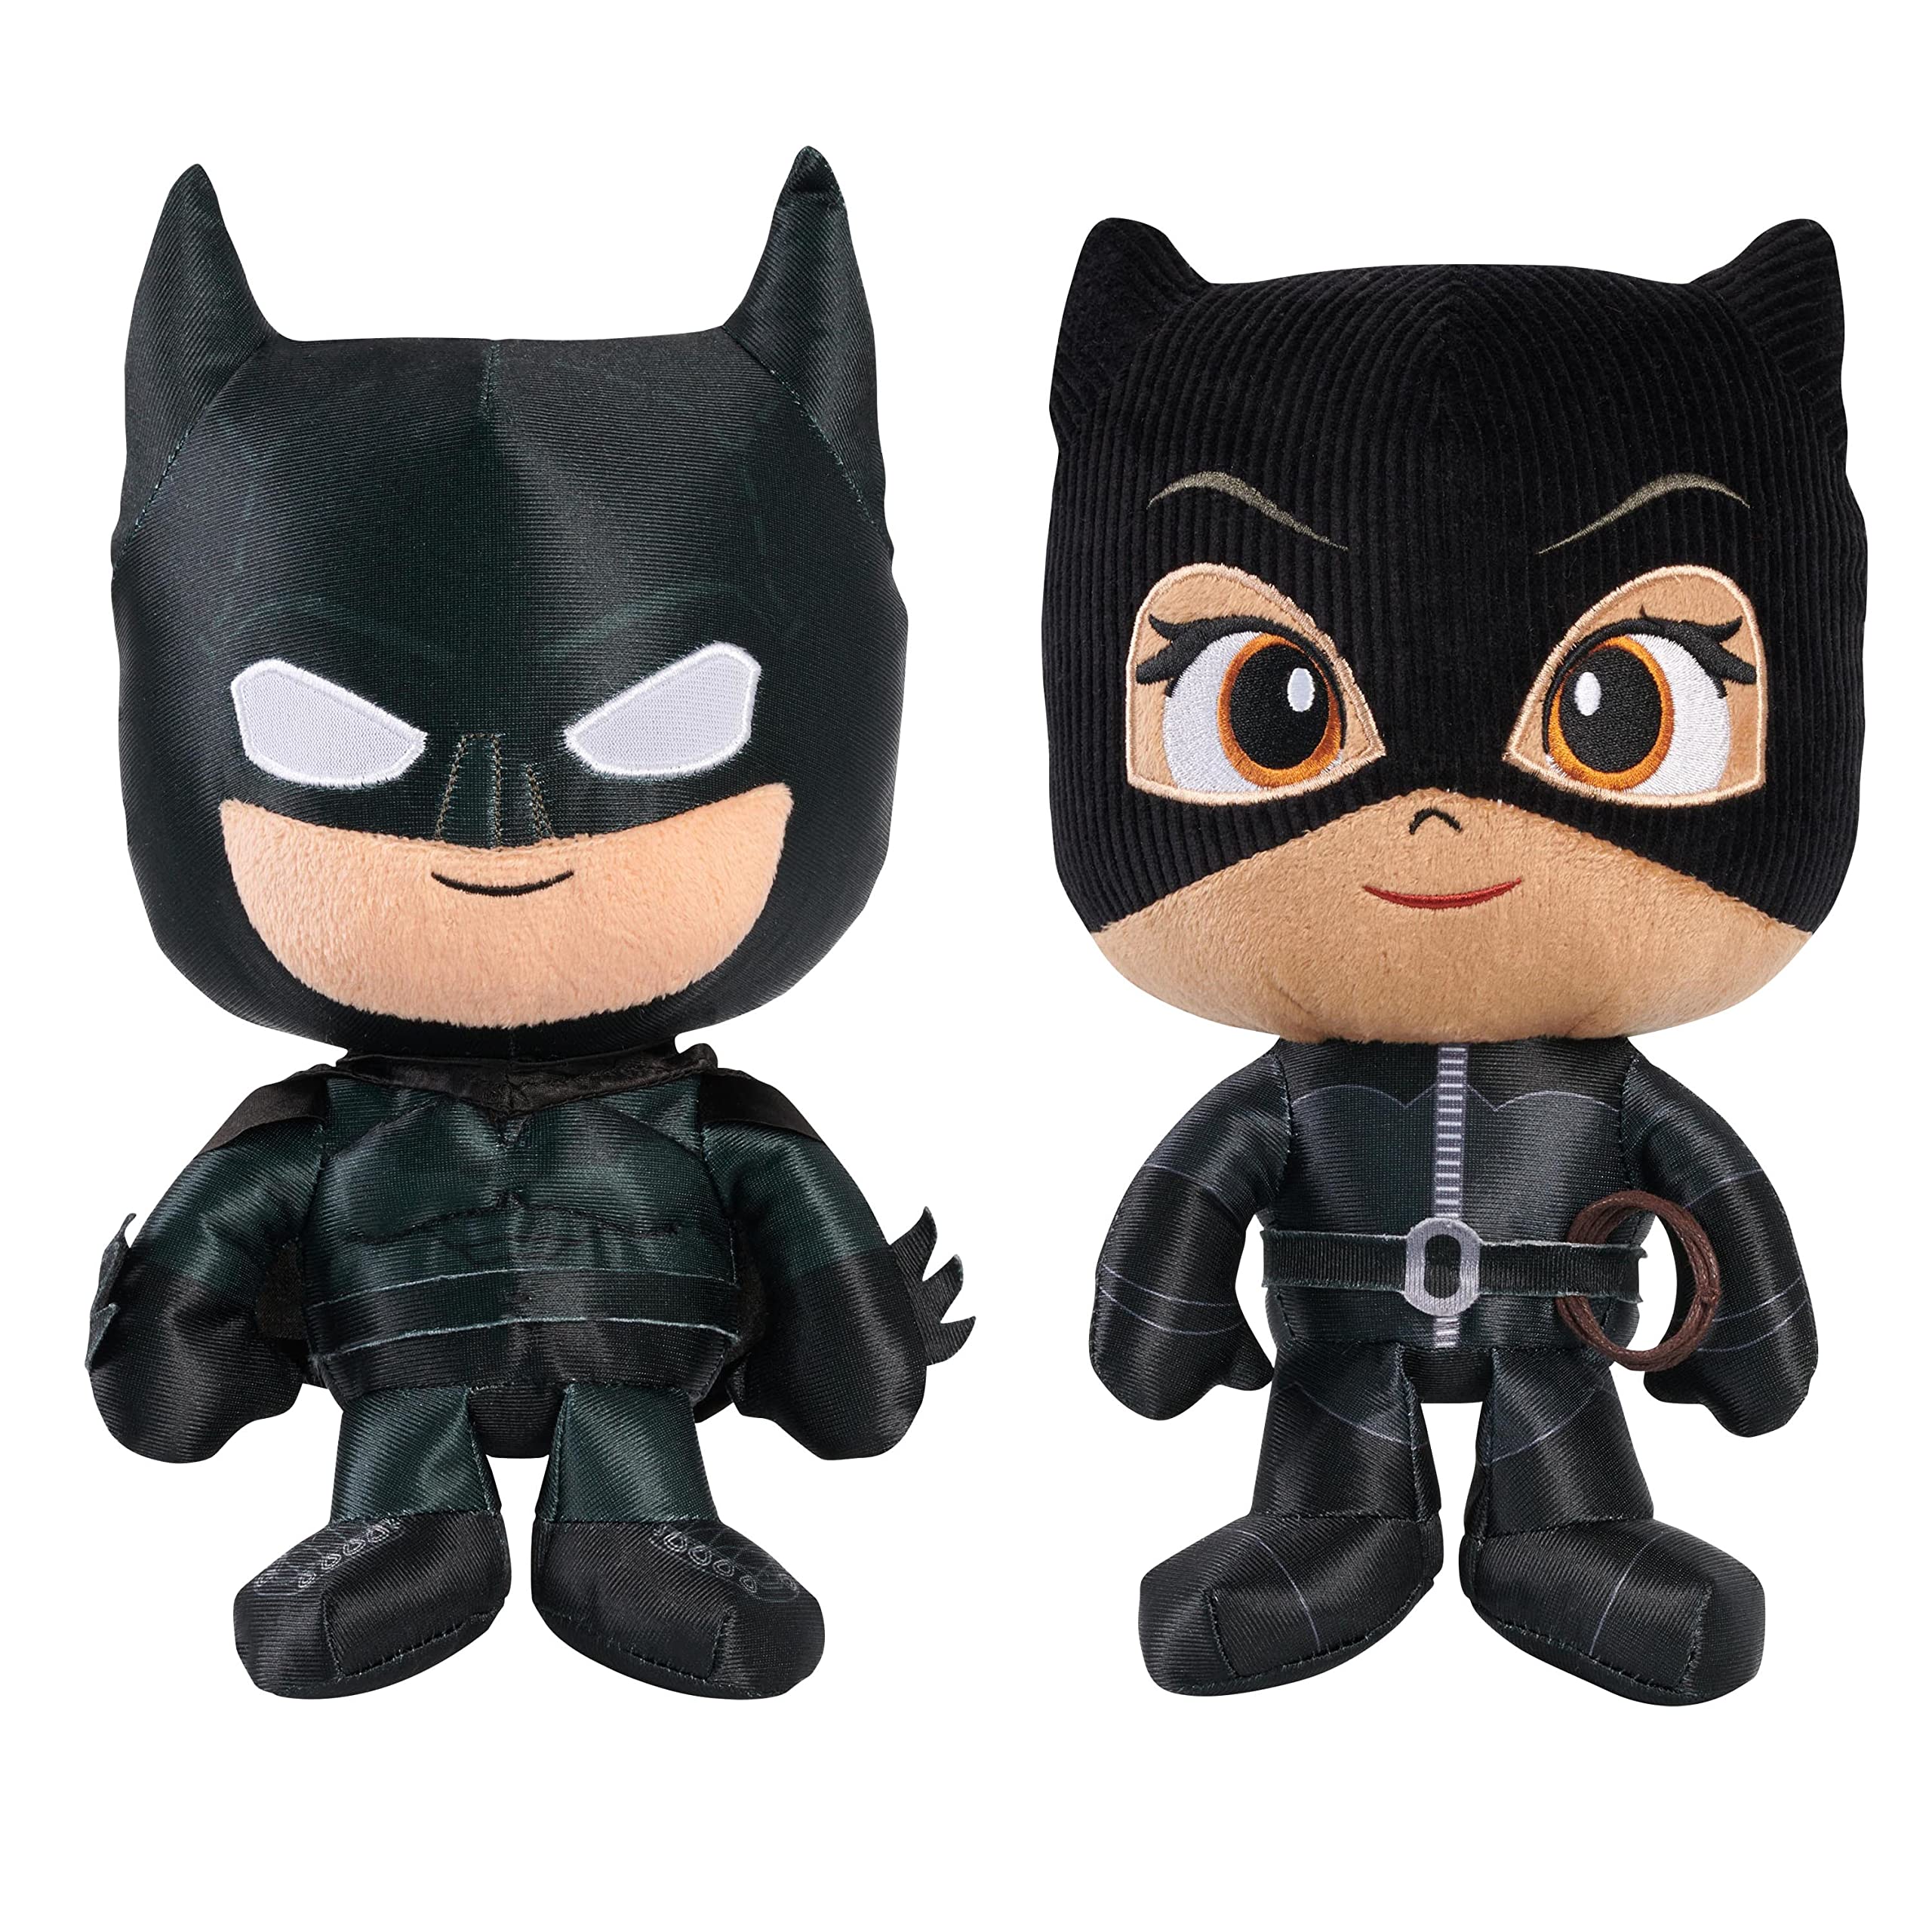 BATMAN The and Selina Kyle 11-Inch Small Plush Toys 2-Pack, The Movie, Kids Toys for Ages 3 Up, Basket Stuffers and Small Gifts, Amazon Exclusive